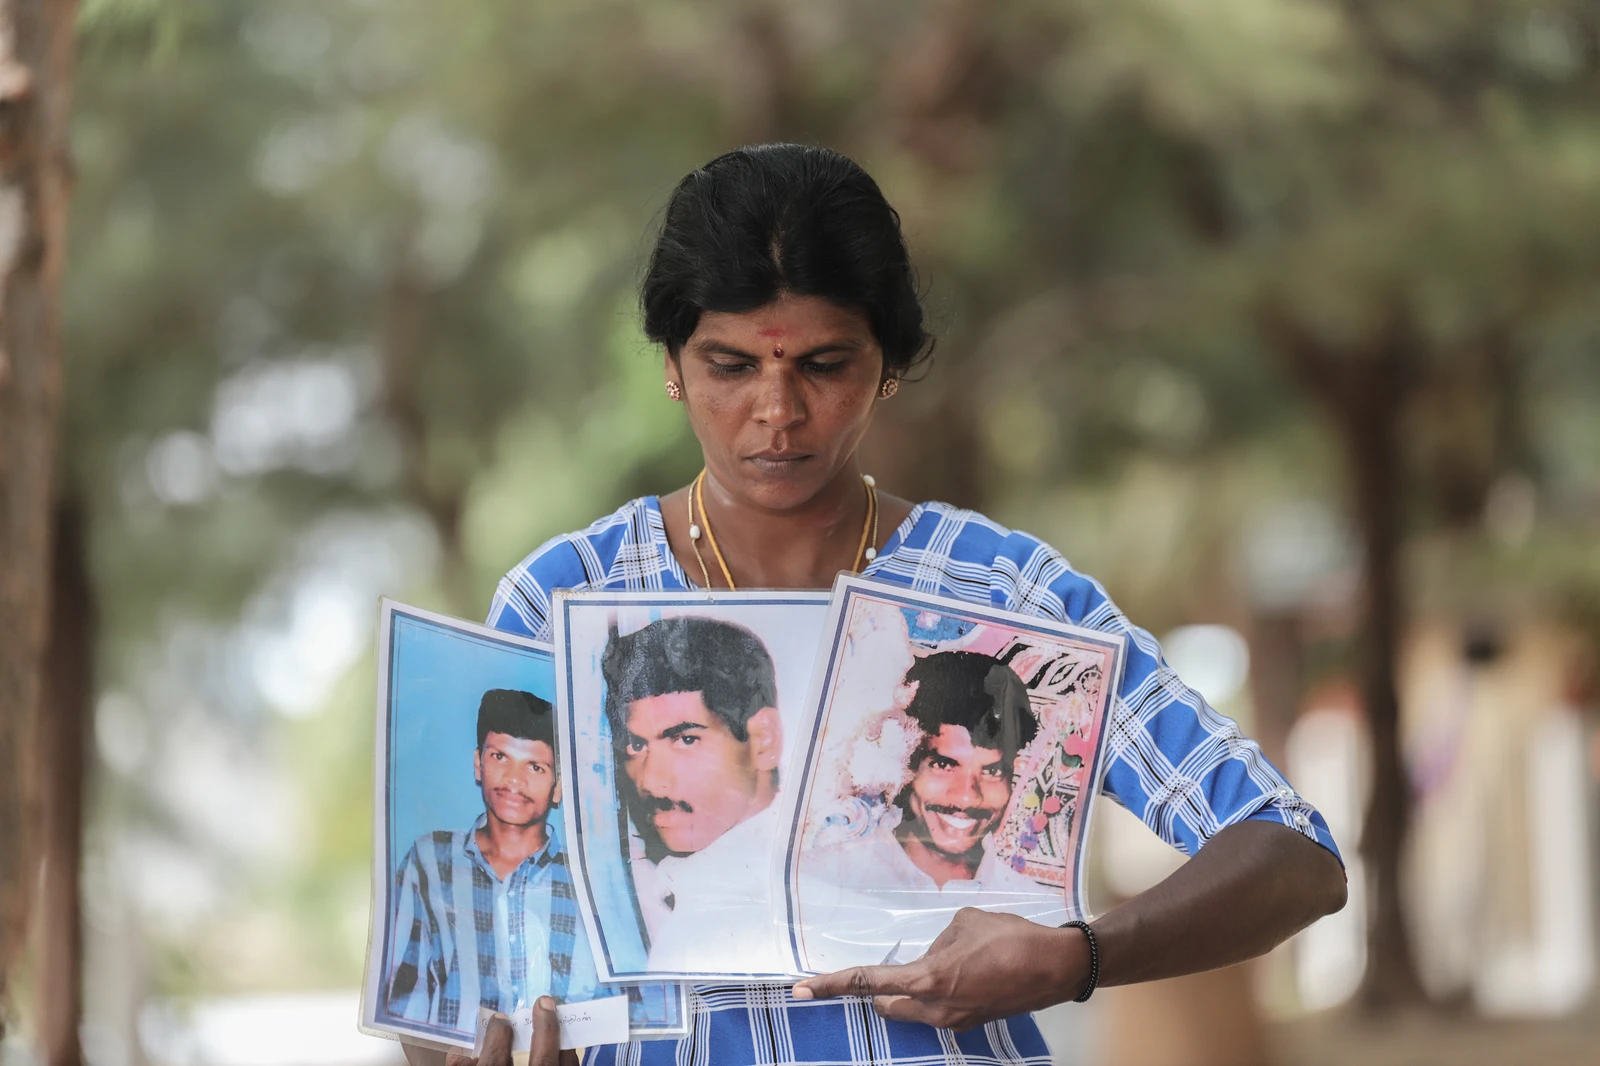 RANJANIDEVI HOLDS PHOTOS OF HER HUSBAND (MIDDLE) AND HER TWO BROTHERS WHO WENT MISSING DURING THE CIVIL WAR.